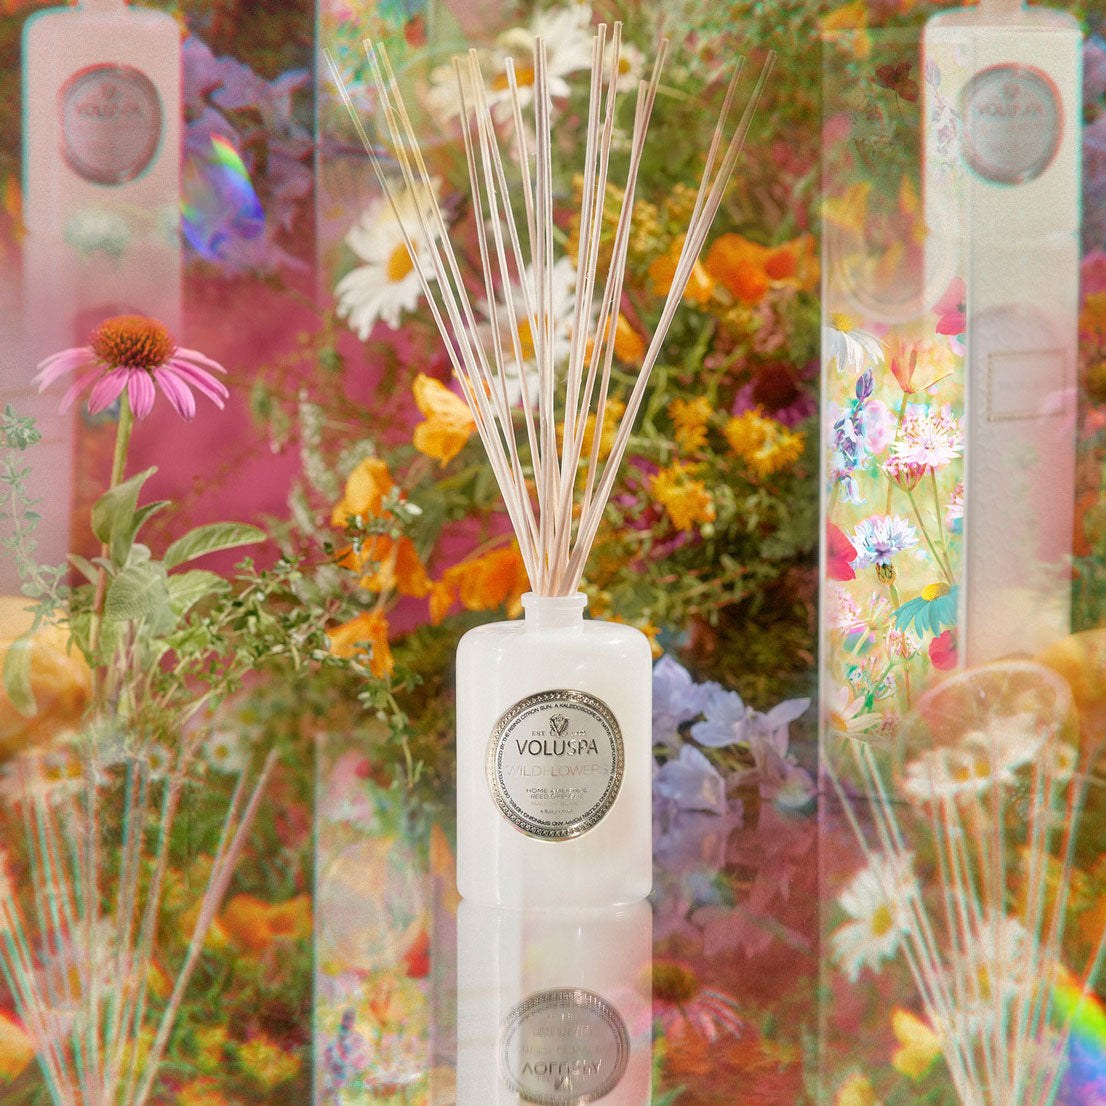 Wildflowers - Reed Diffuser